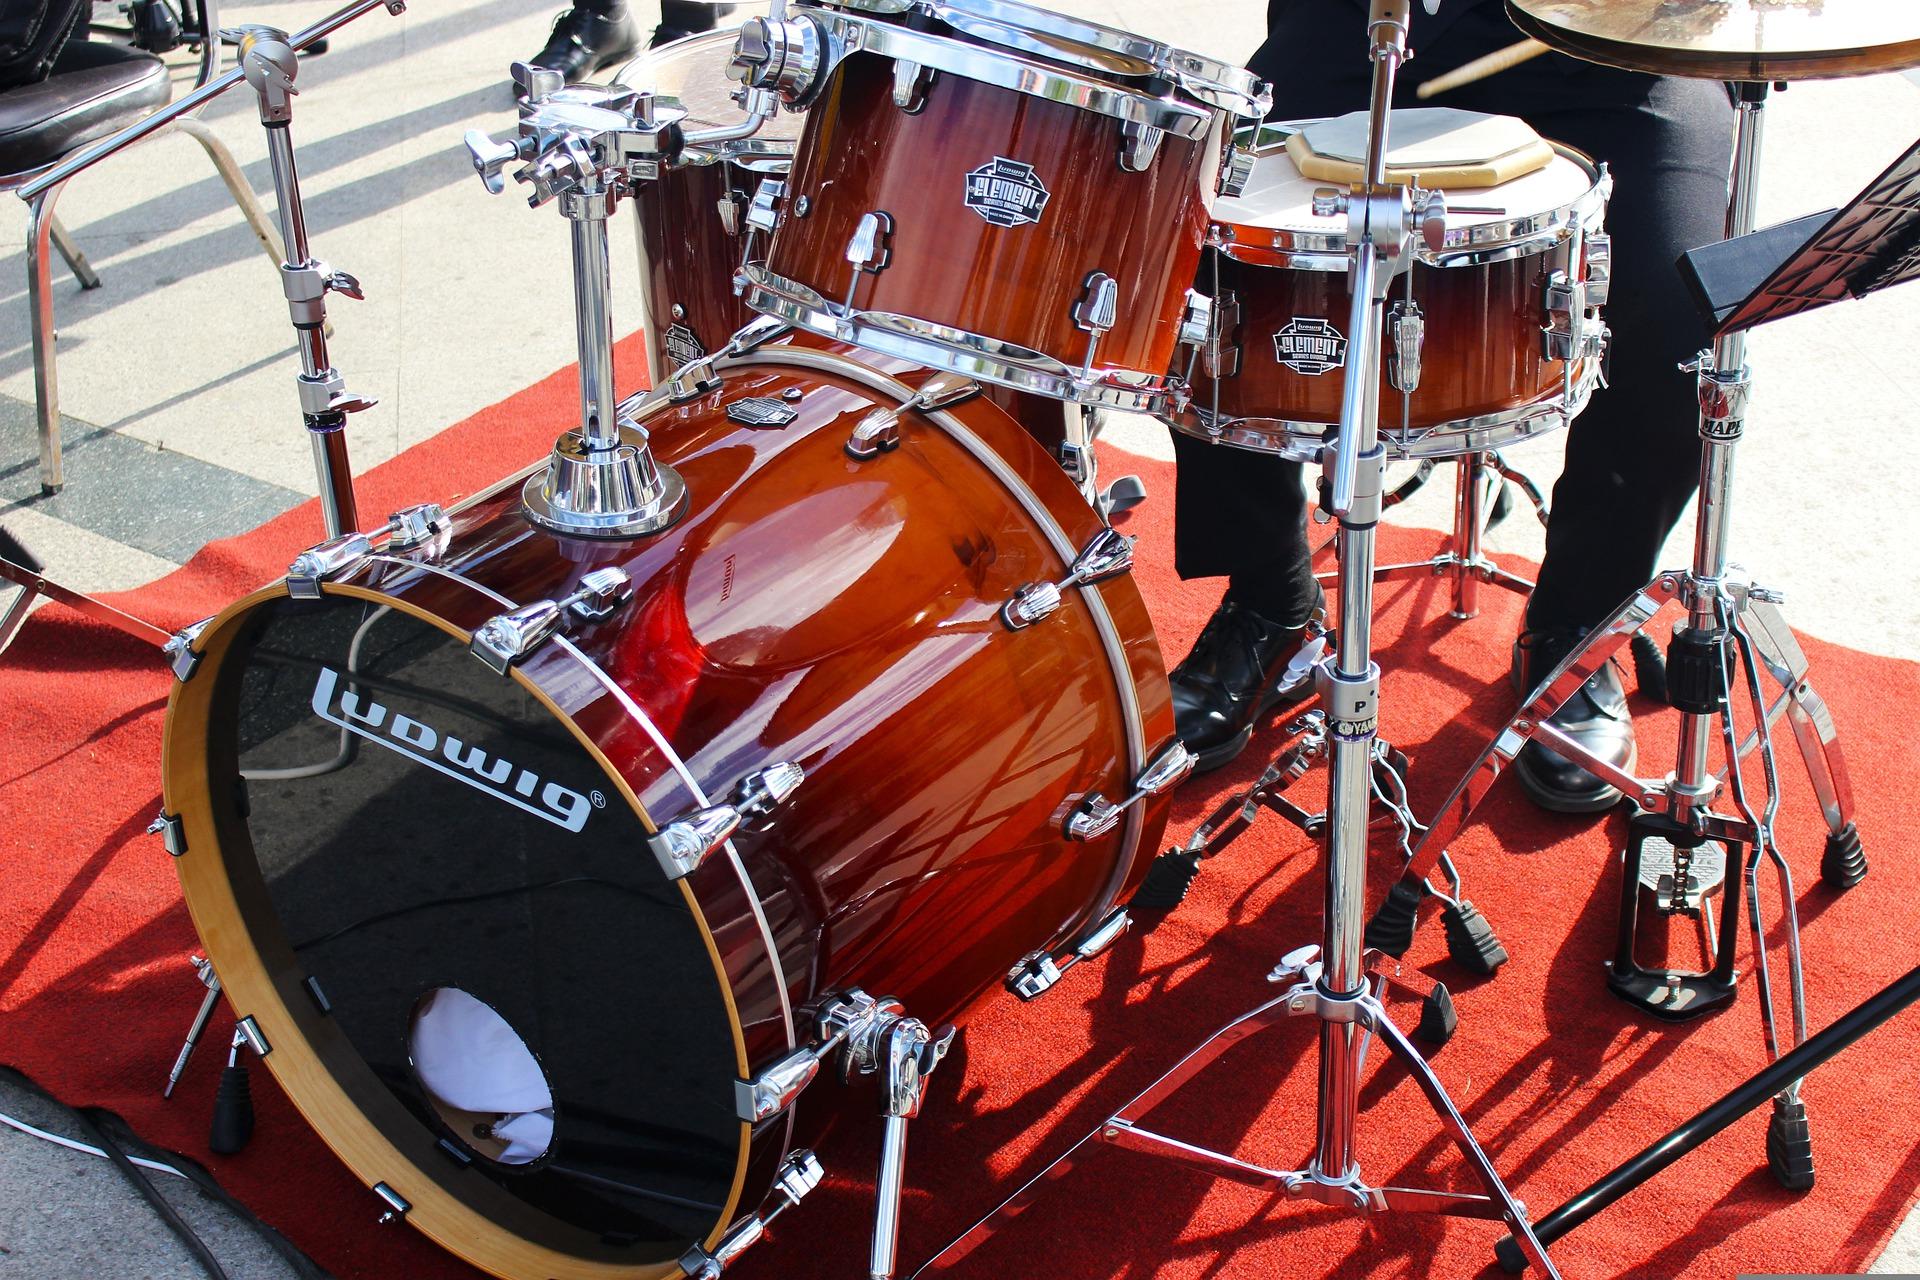 A Ludwig Drum Kit up close